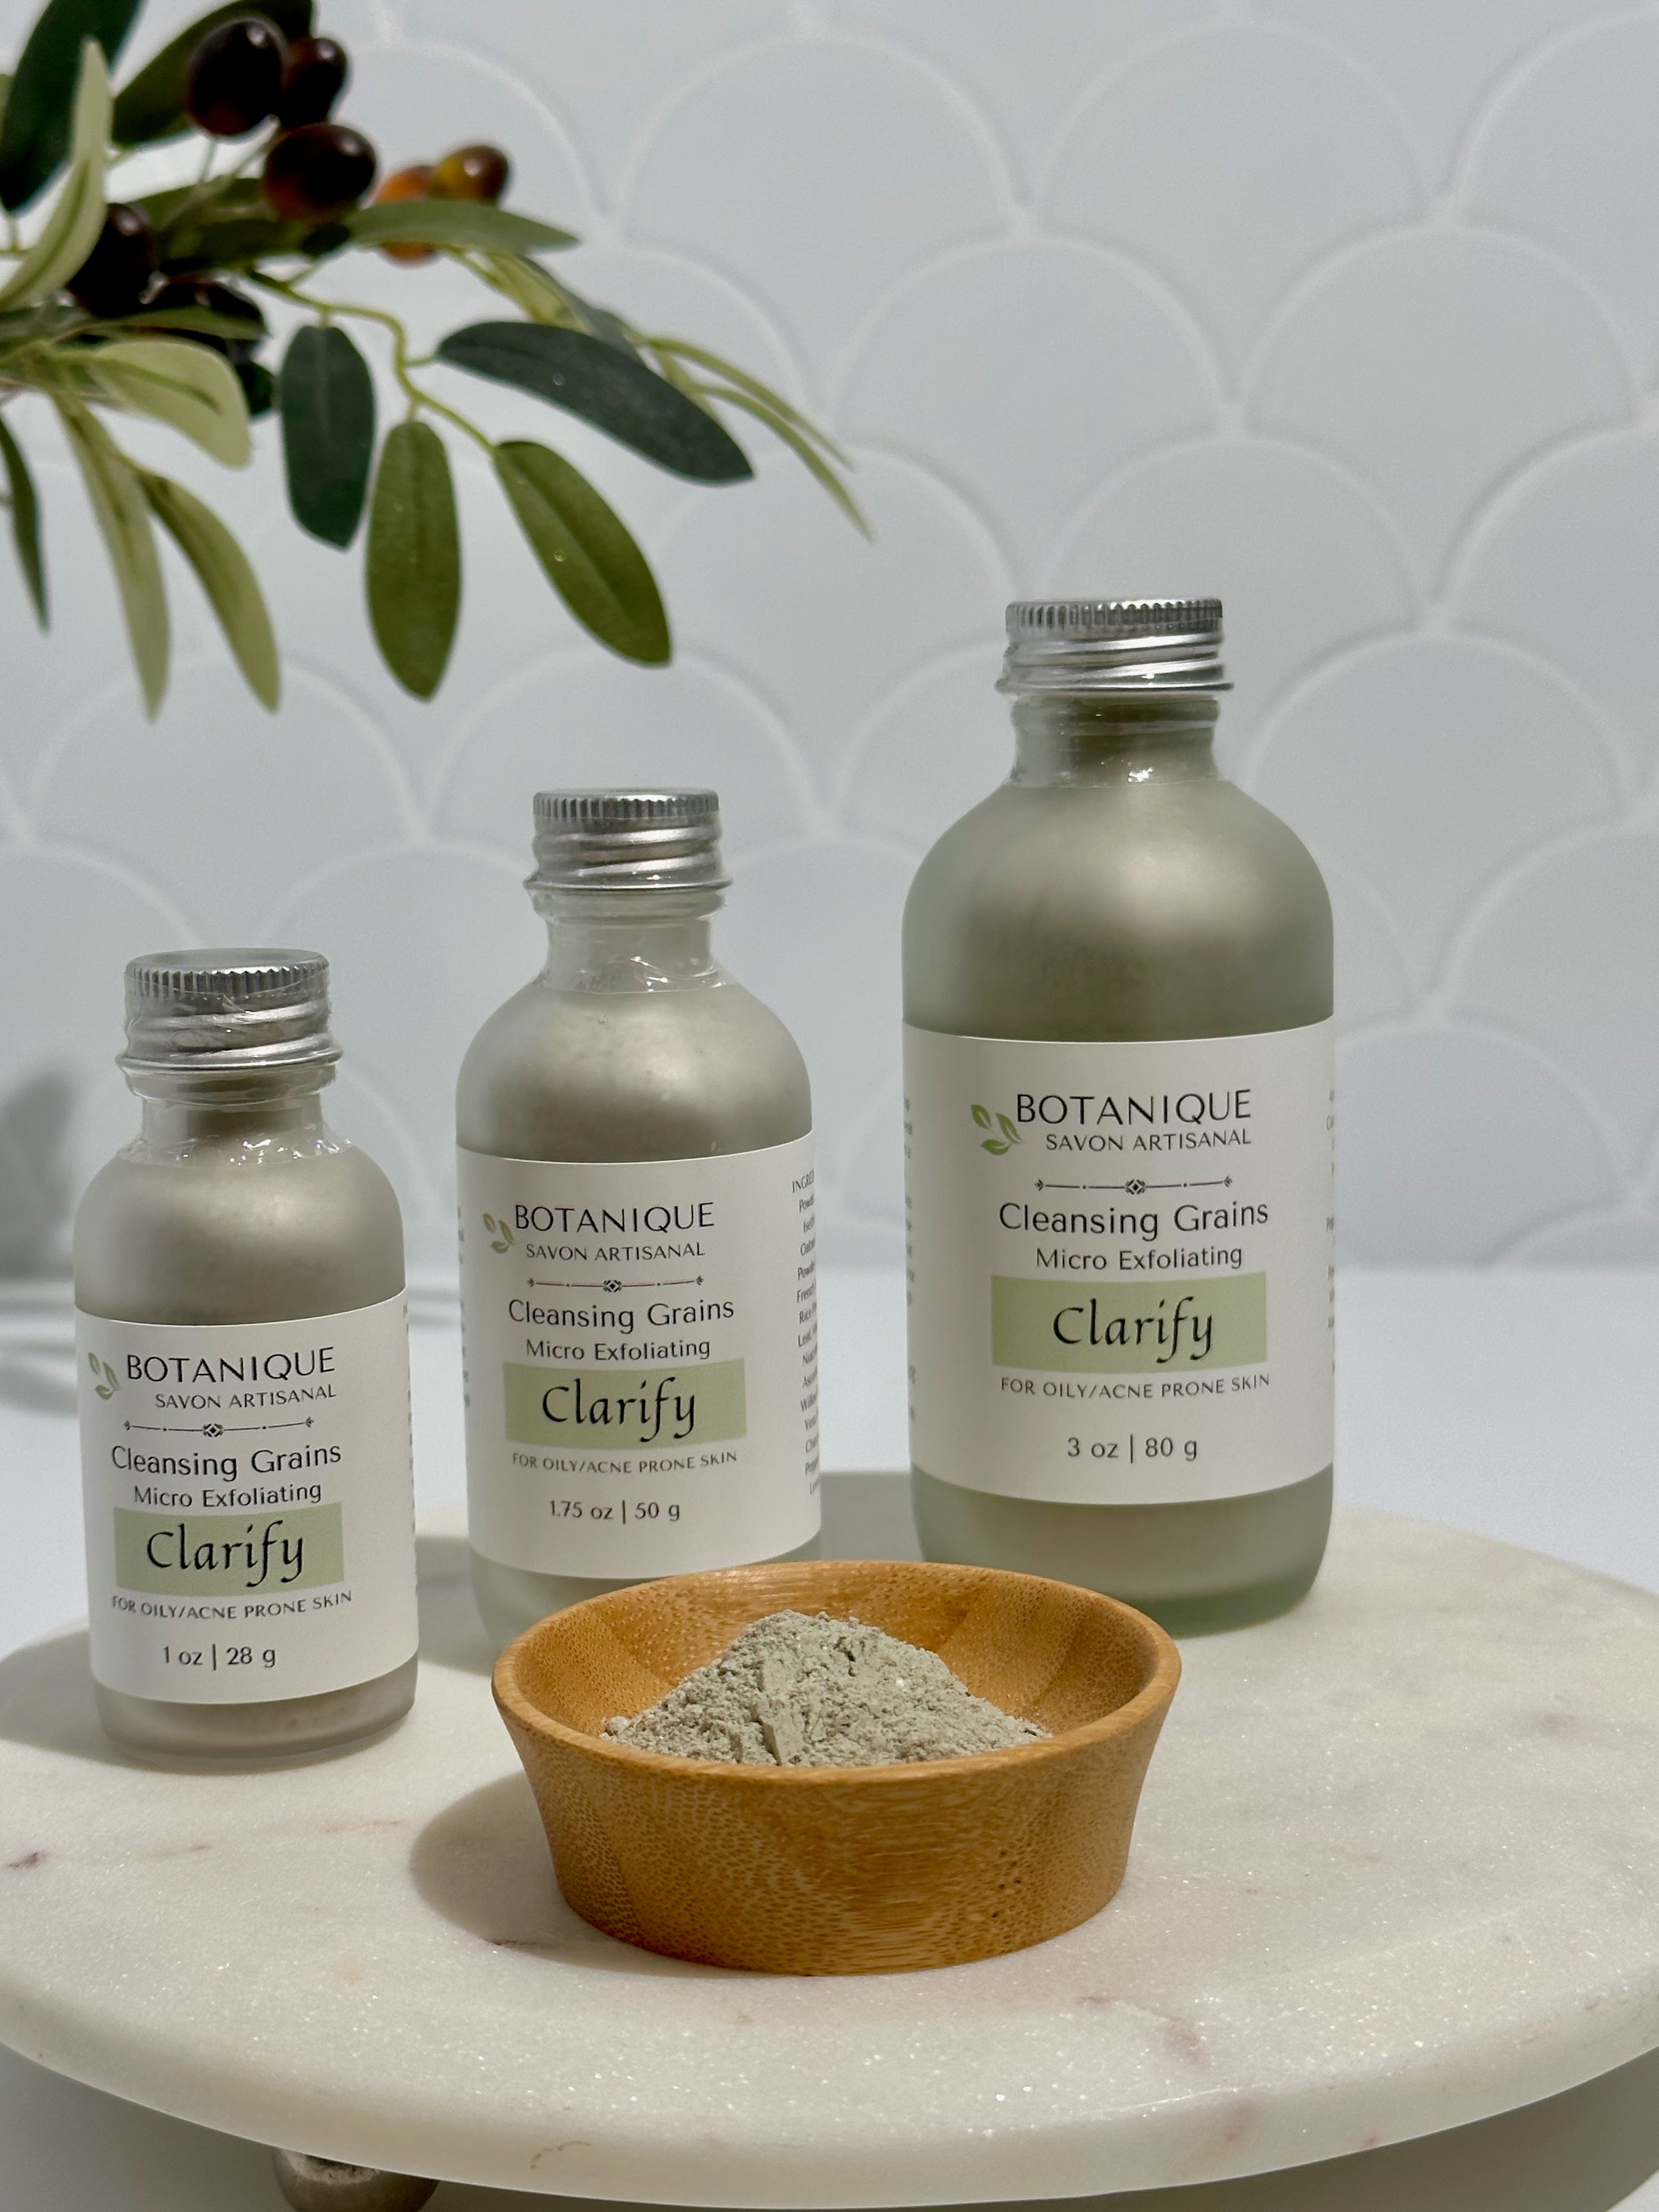 CLARIFY CLEANSING GRAINS - FOR OILY/ACNE PRONE SKIN